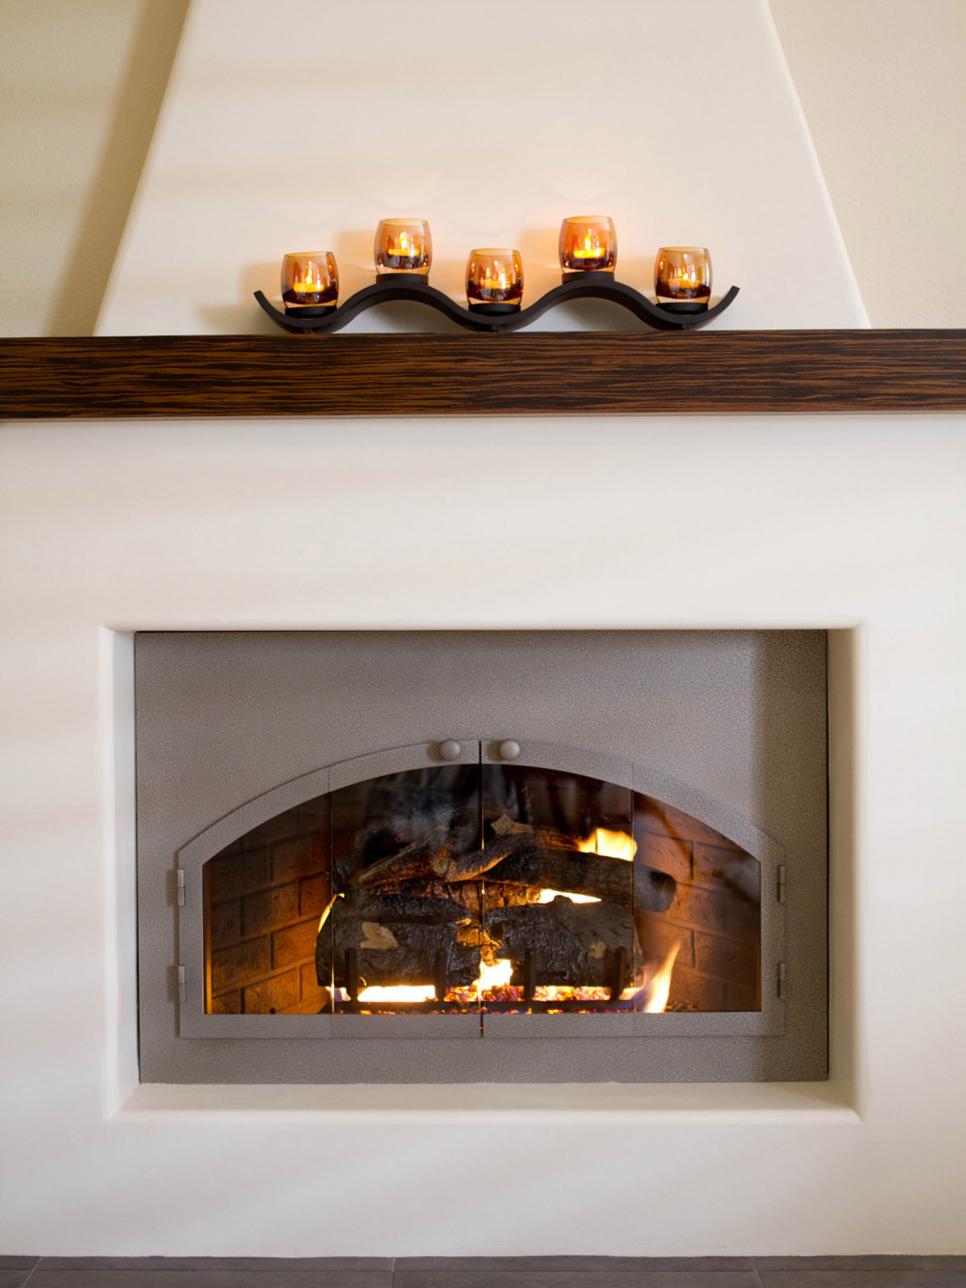 White Adobe Fireplace With Gas Logs and Wood Mantel